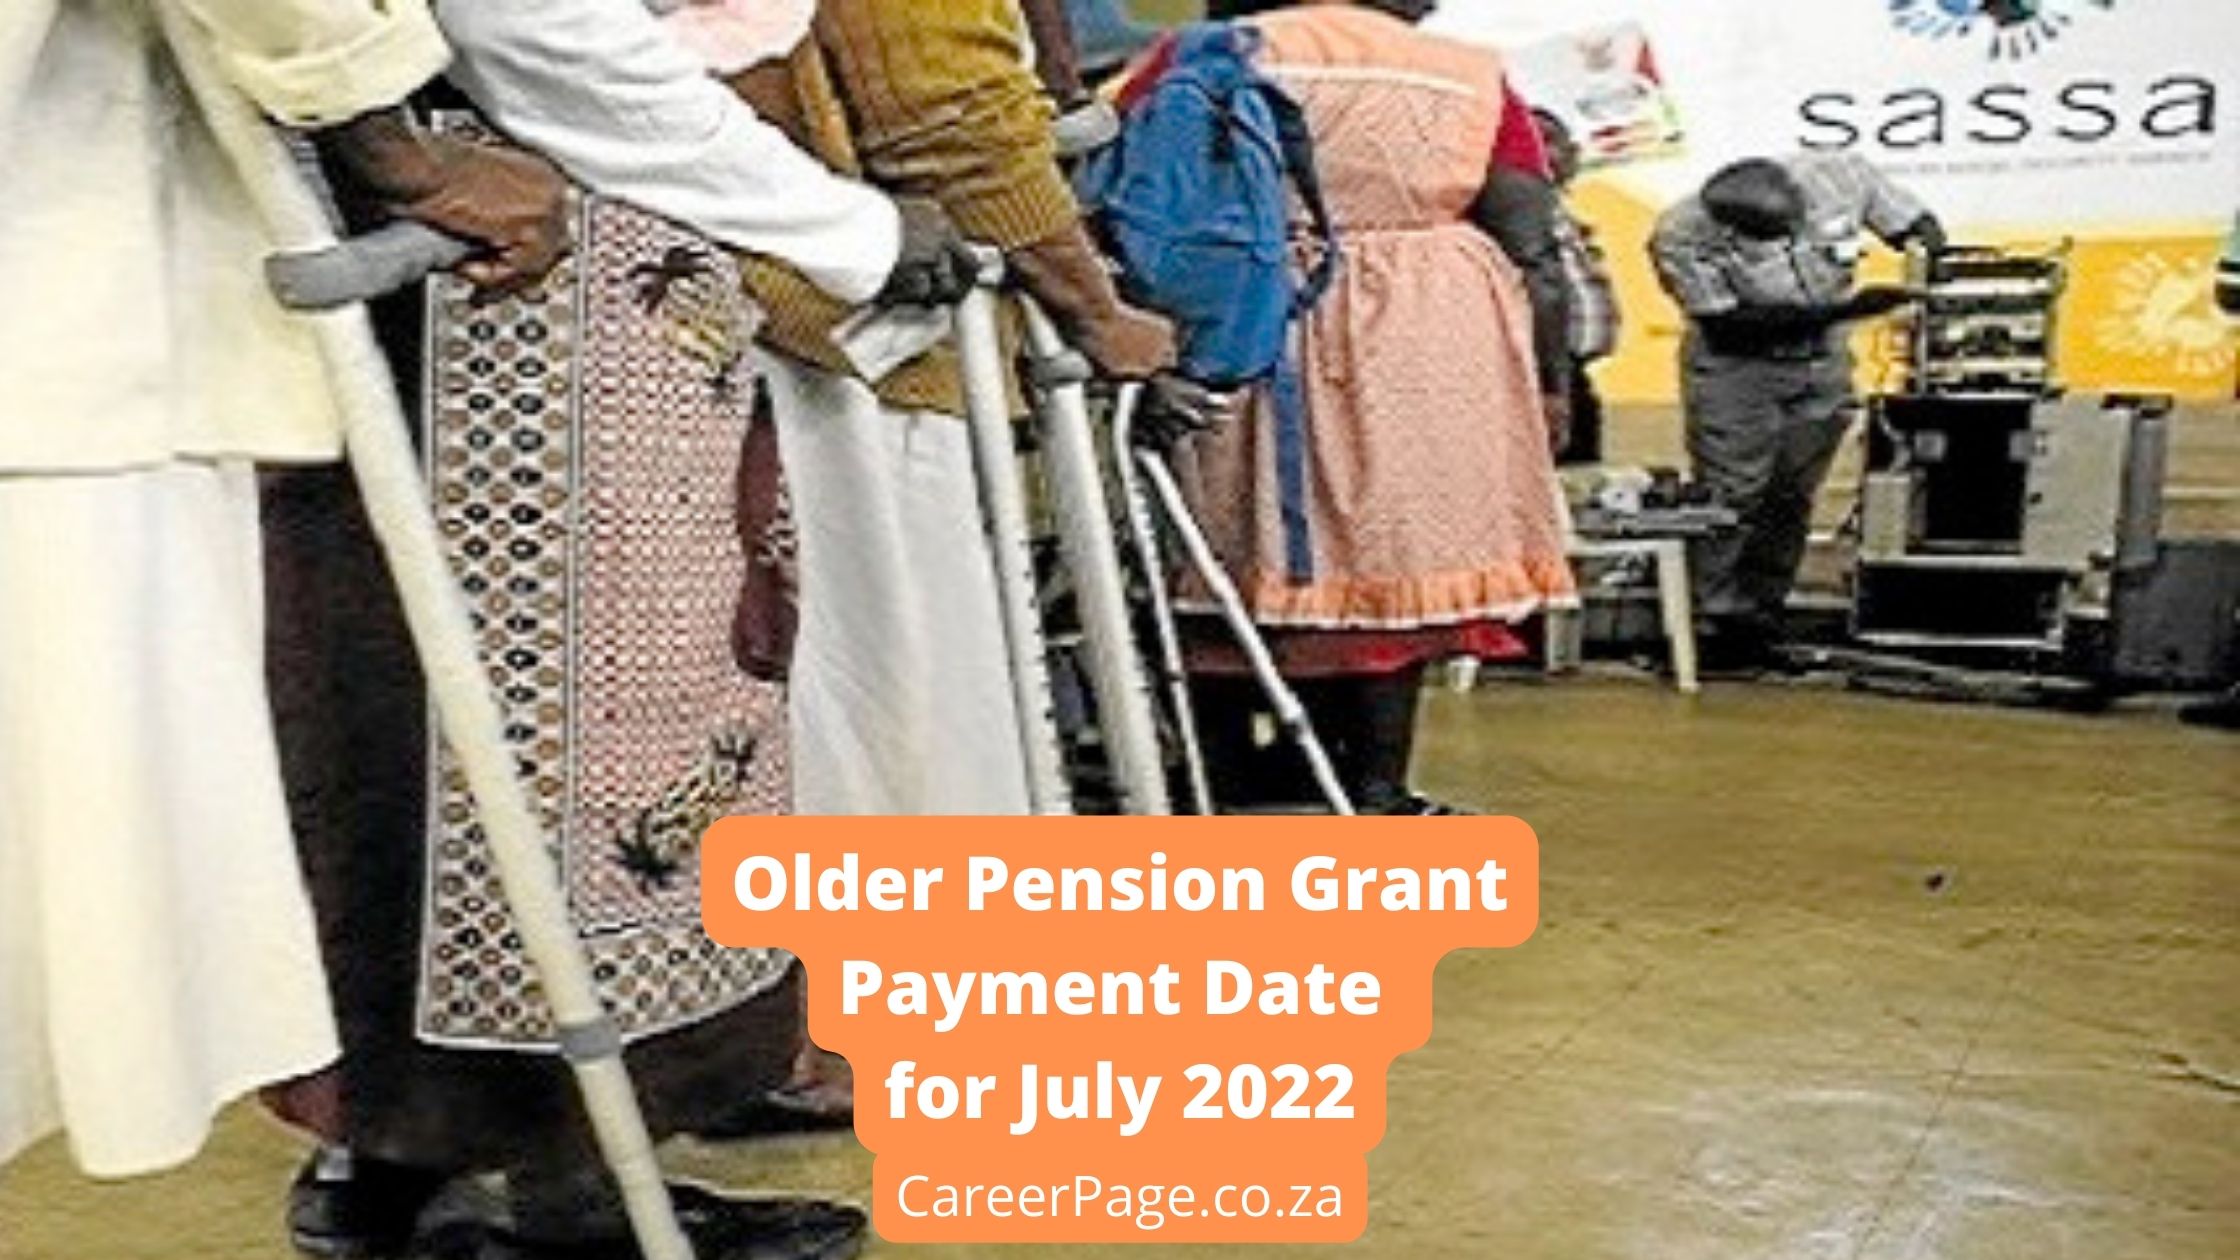 Sassa Old Age Pension Payment Date for July